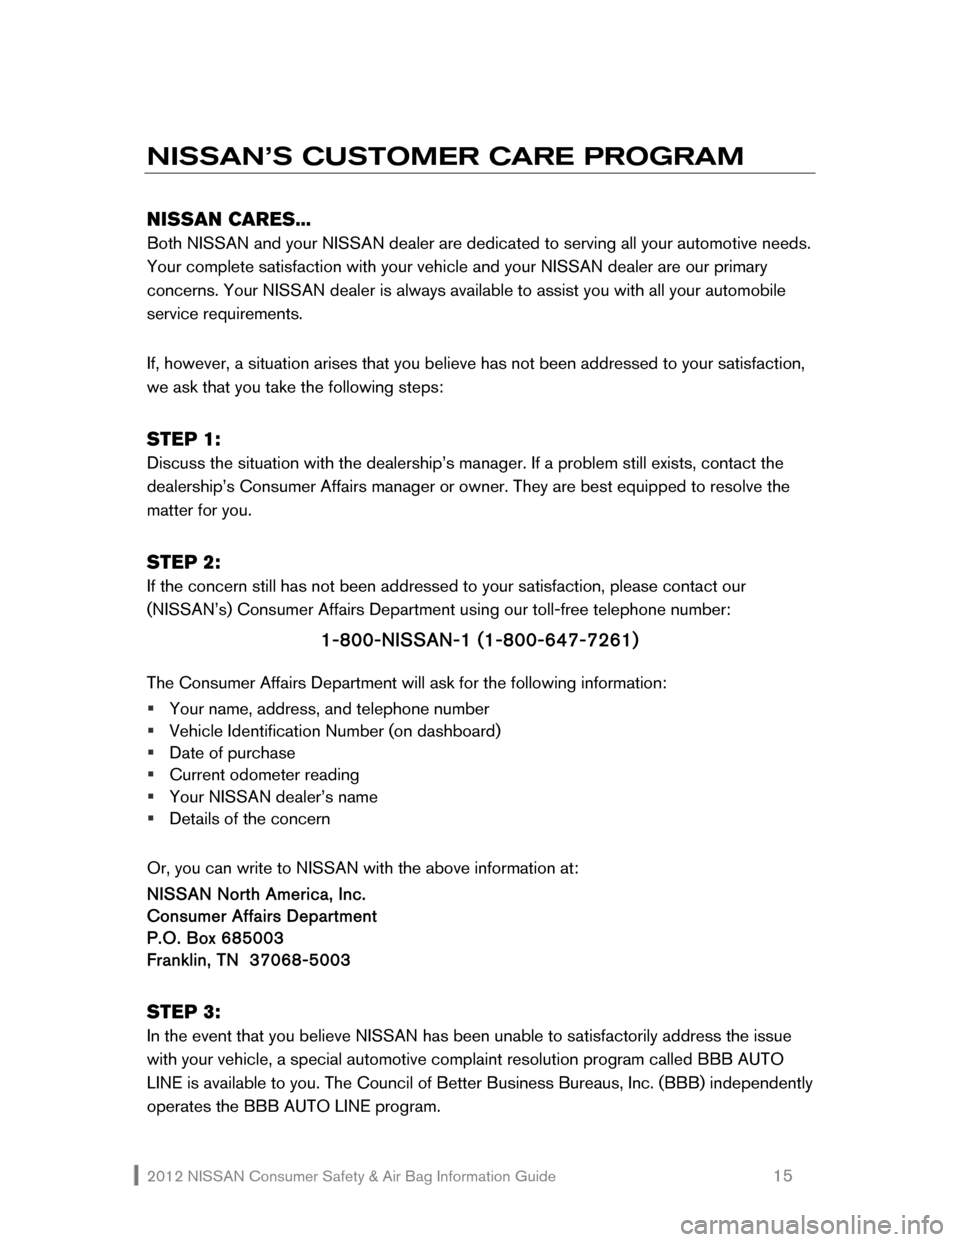 NISSAN ROGUE 2012 1.G Consumer Safety Air Bag Information Guide 2012 NISSAN Consumer Safety & Air Bag Information Guide                                                   15 
NISSAN’S CUSTOMER CARE PROGRAM 
 
NISSAN CARES... 
Both NISSAN and your NISSAN dealer ar